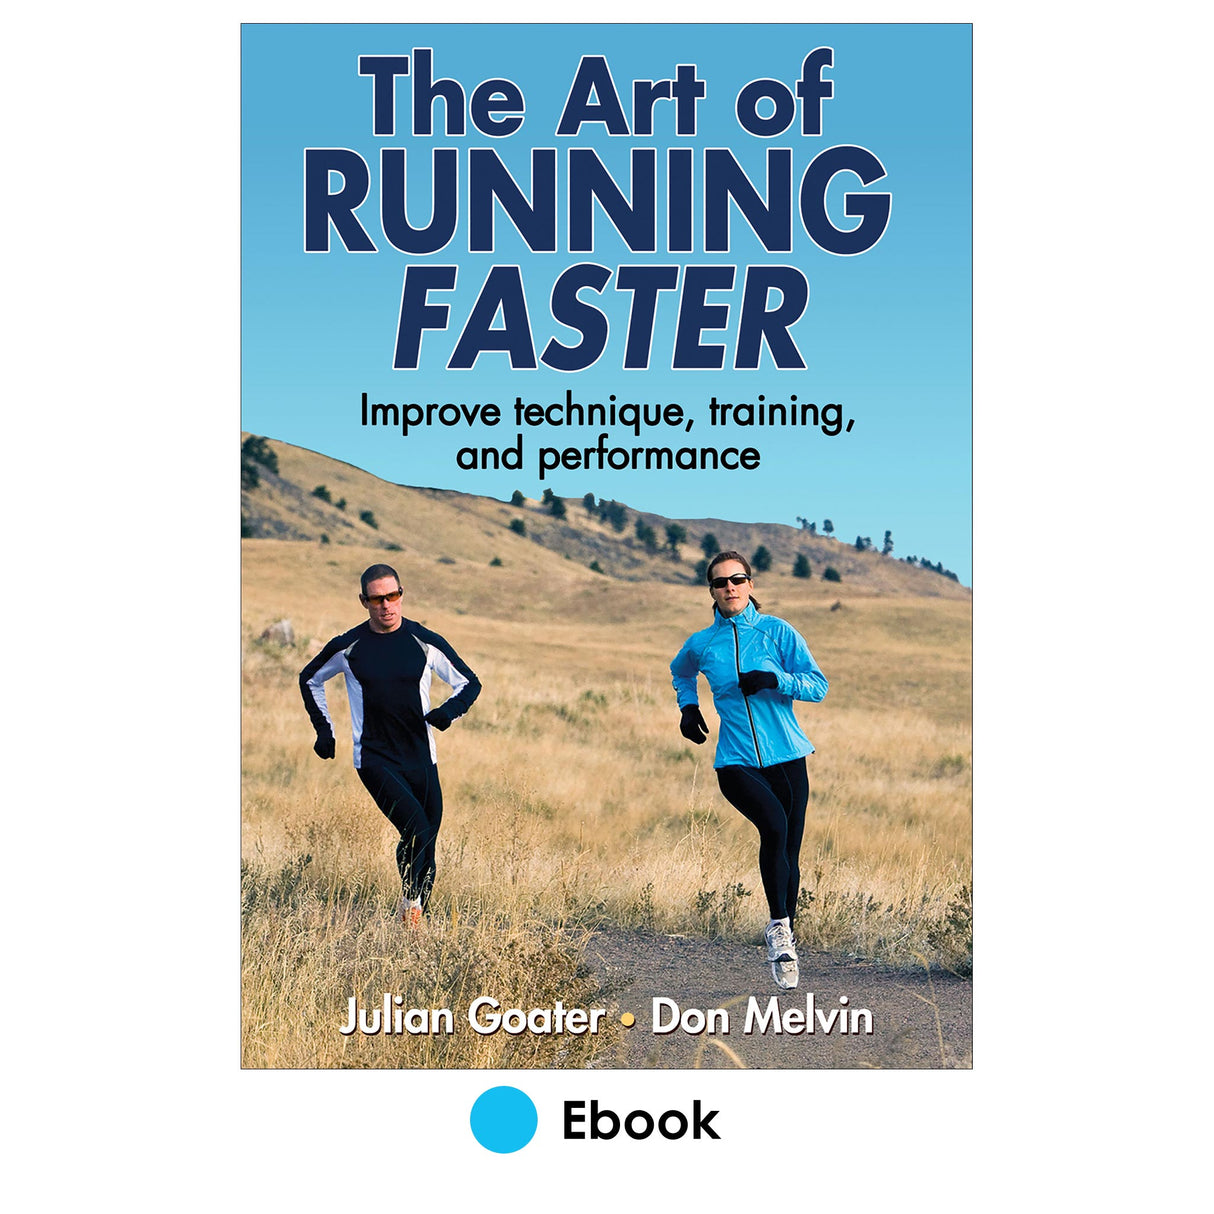 Art of Running Faster PDF, The